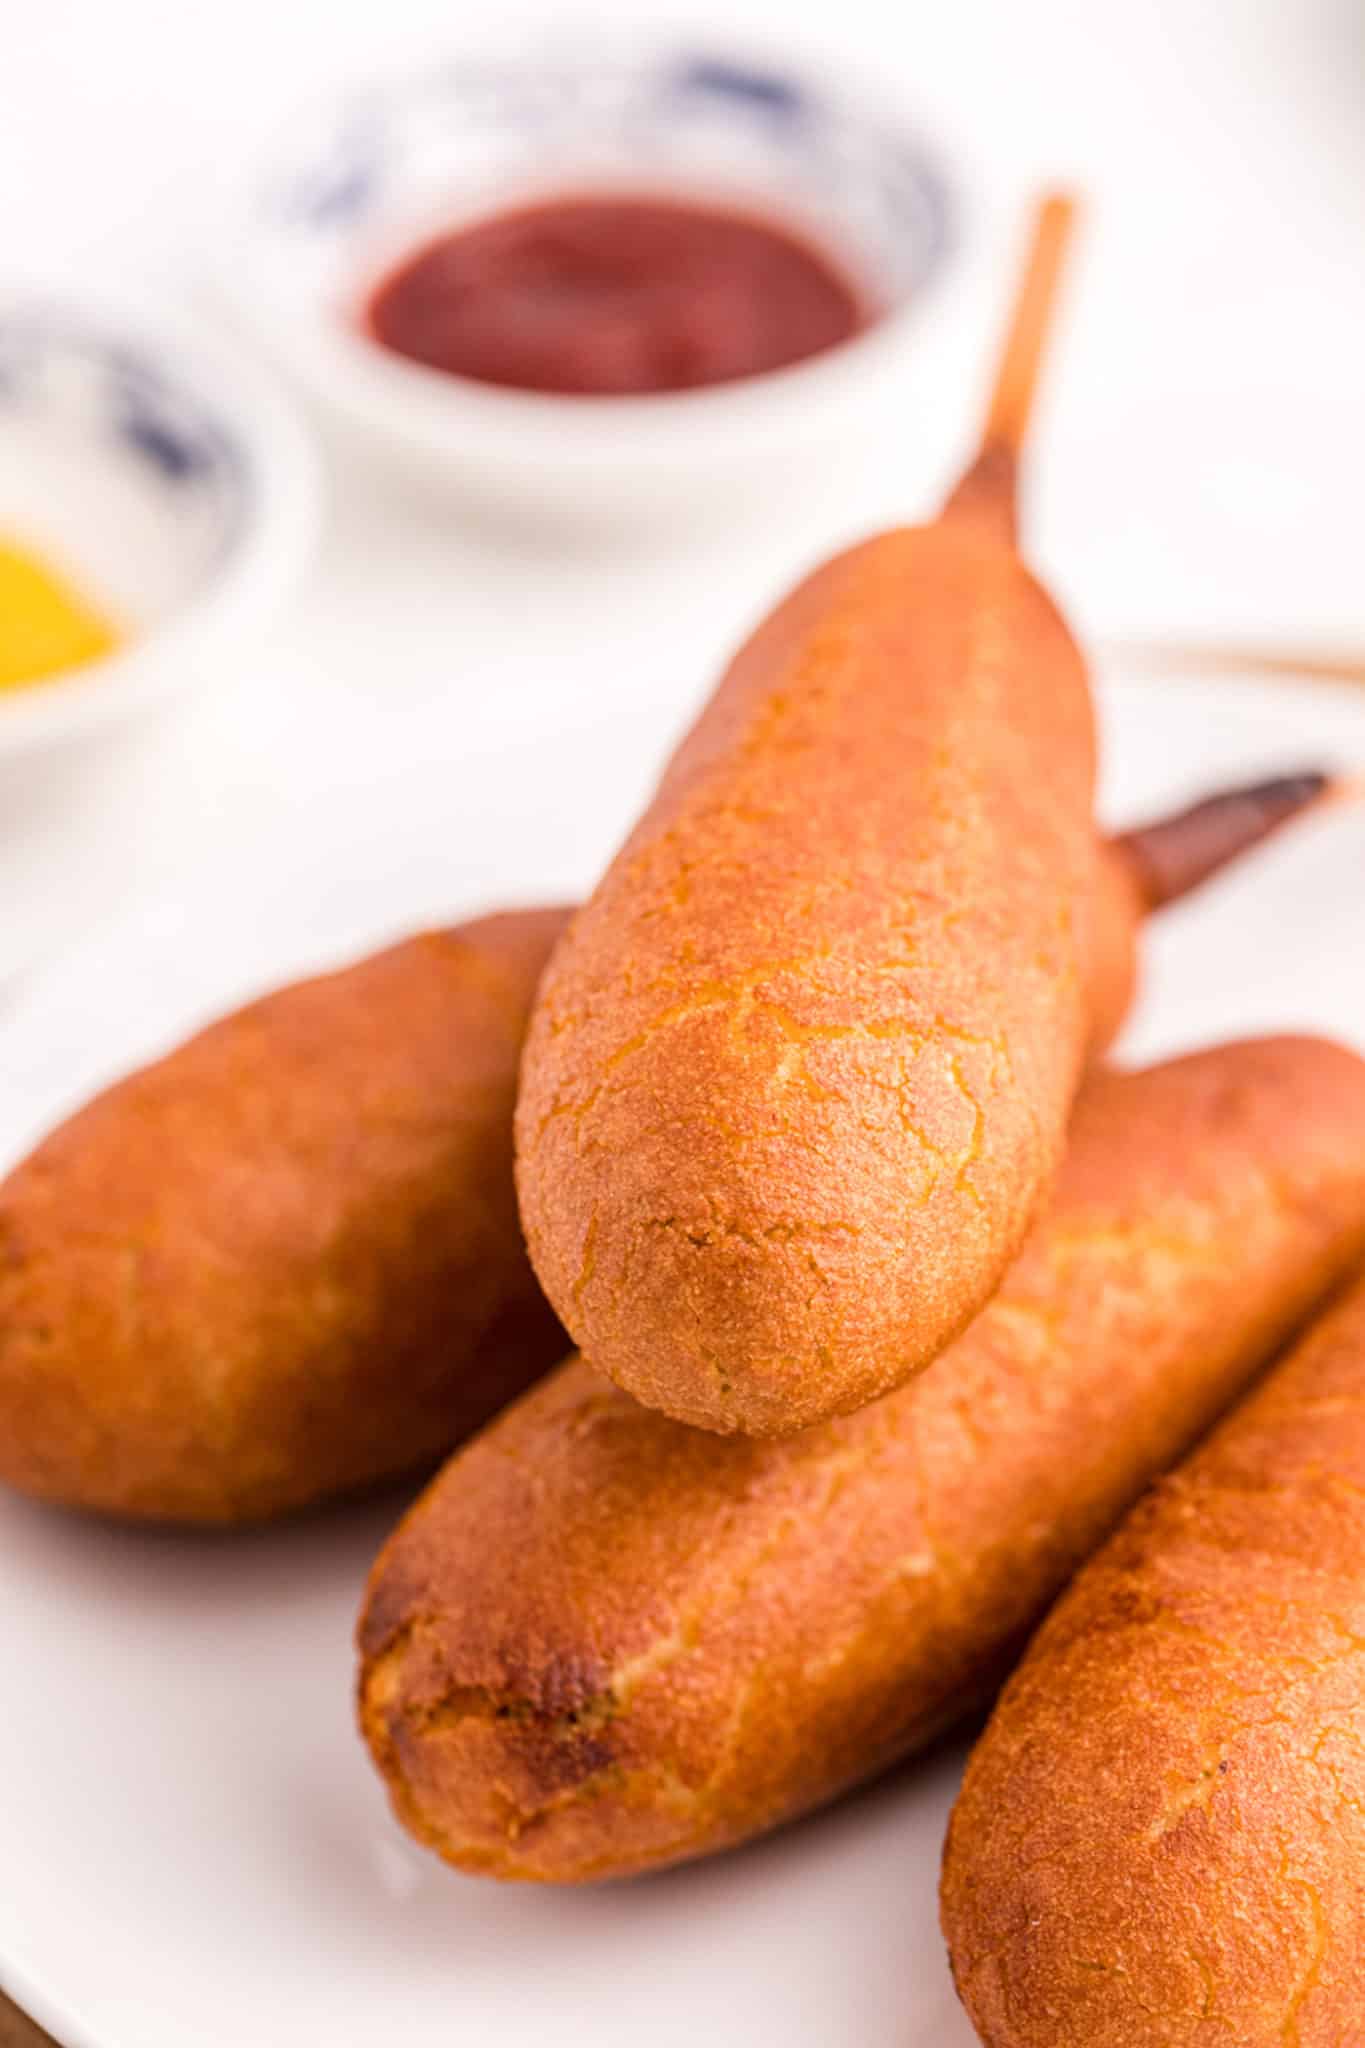 corn dogs on a plate.